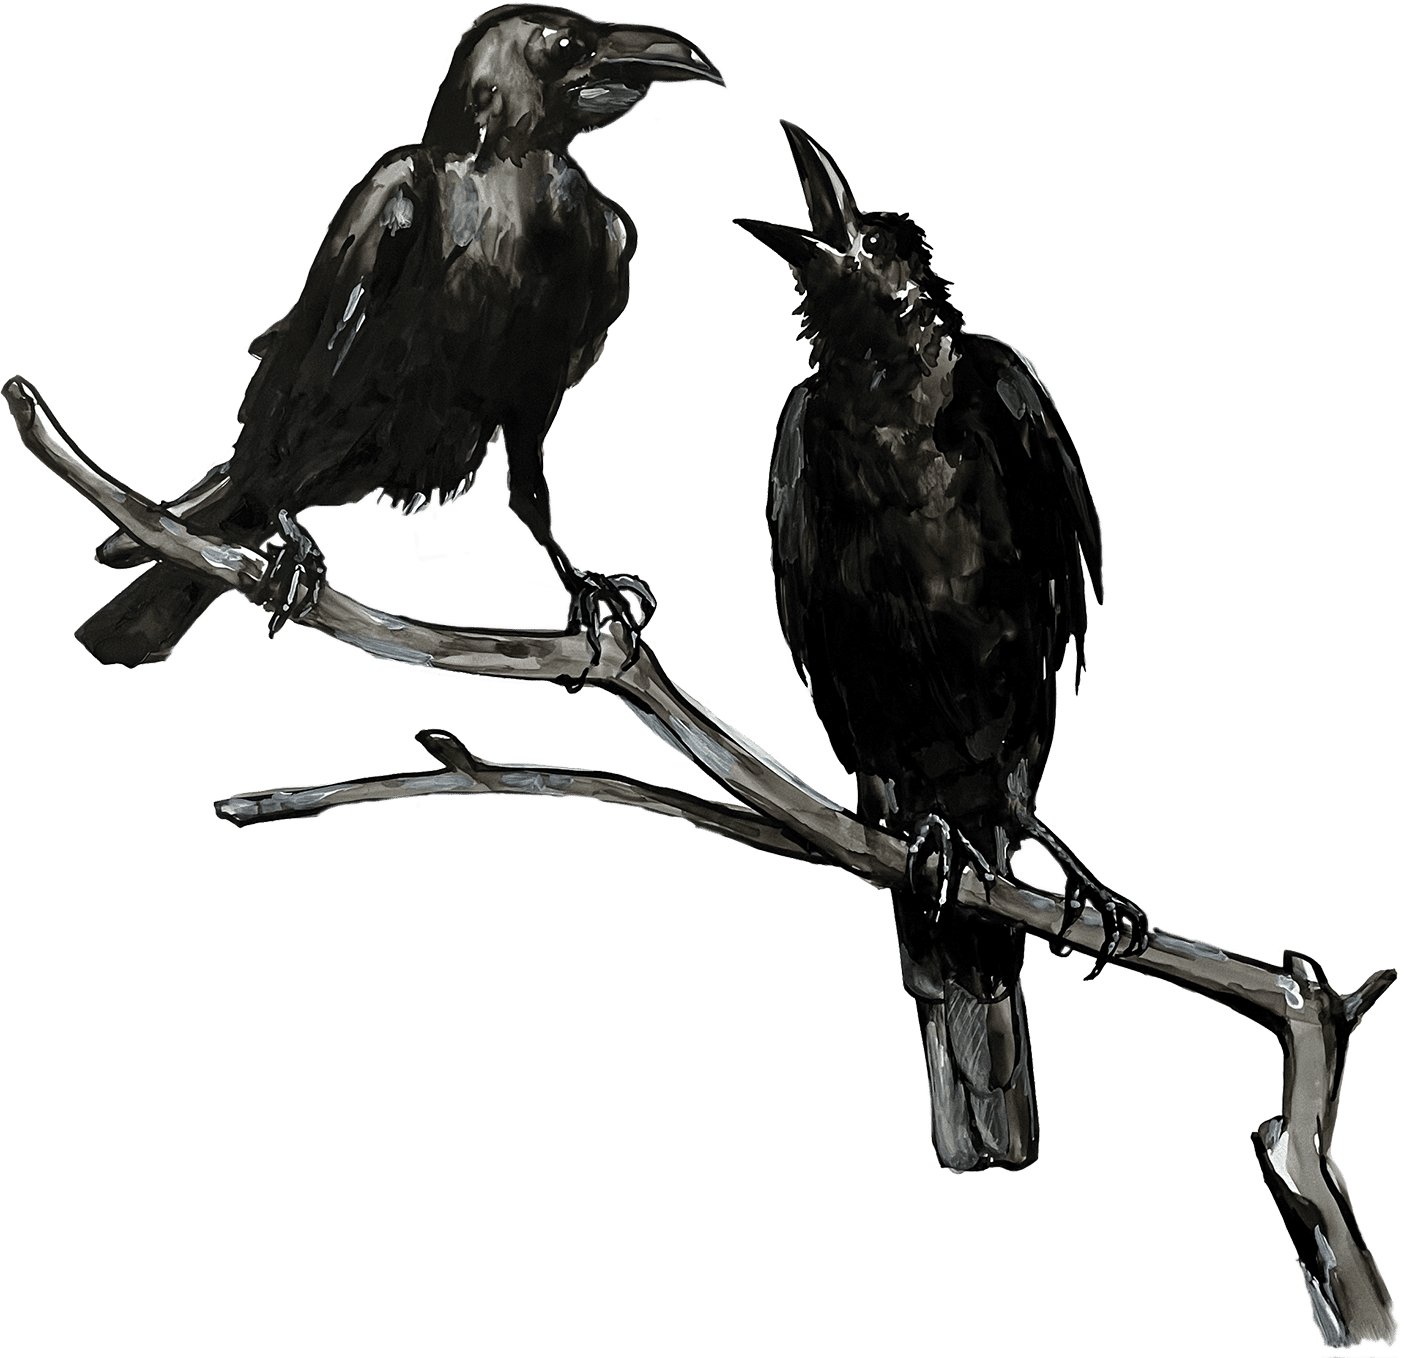 Illustration of two crows on a branch.